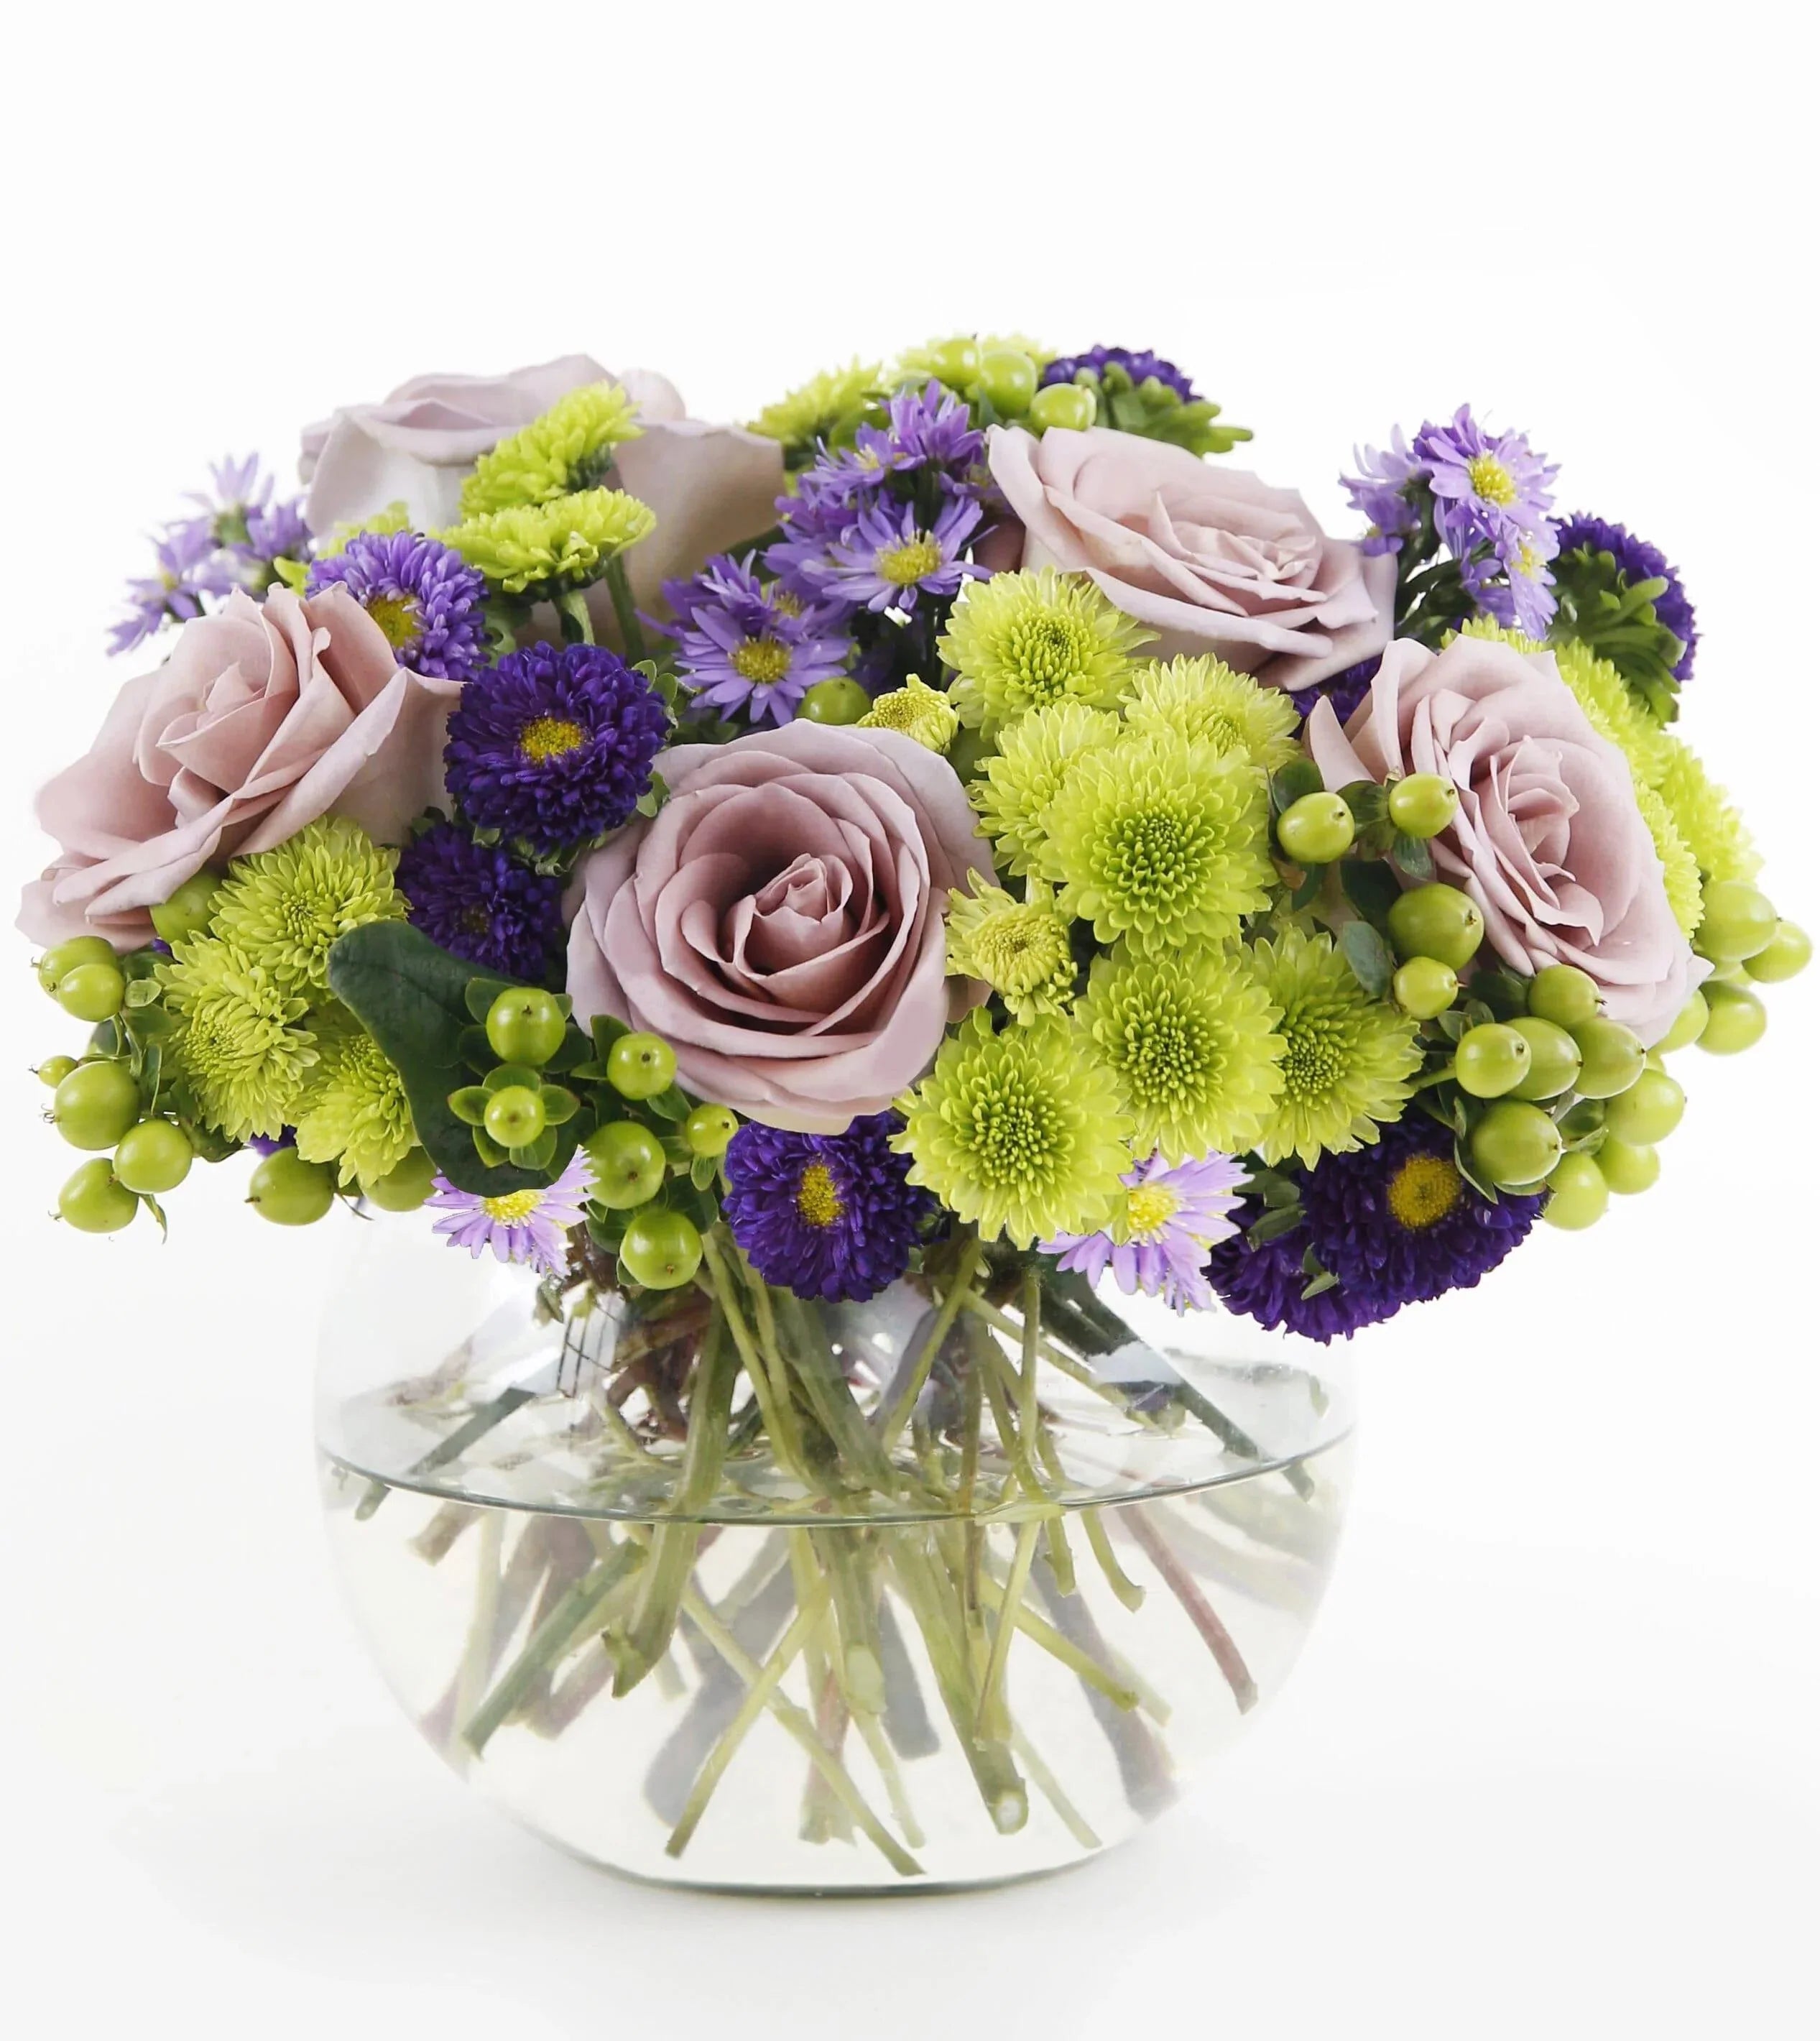 Fresh Flowers & Flower Delivery in Toronto - Flower Co.